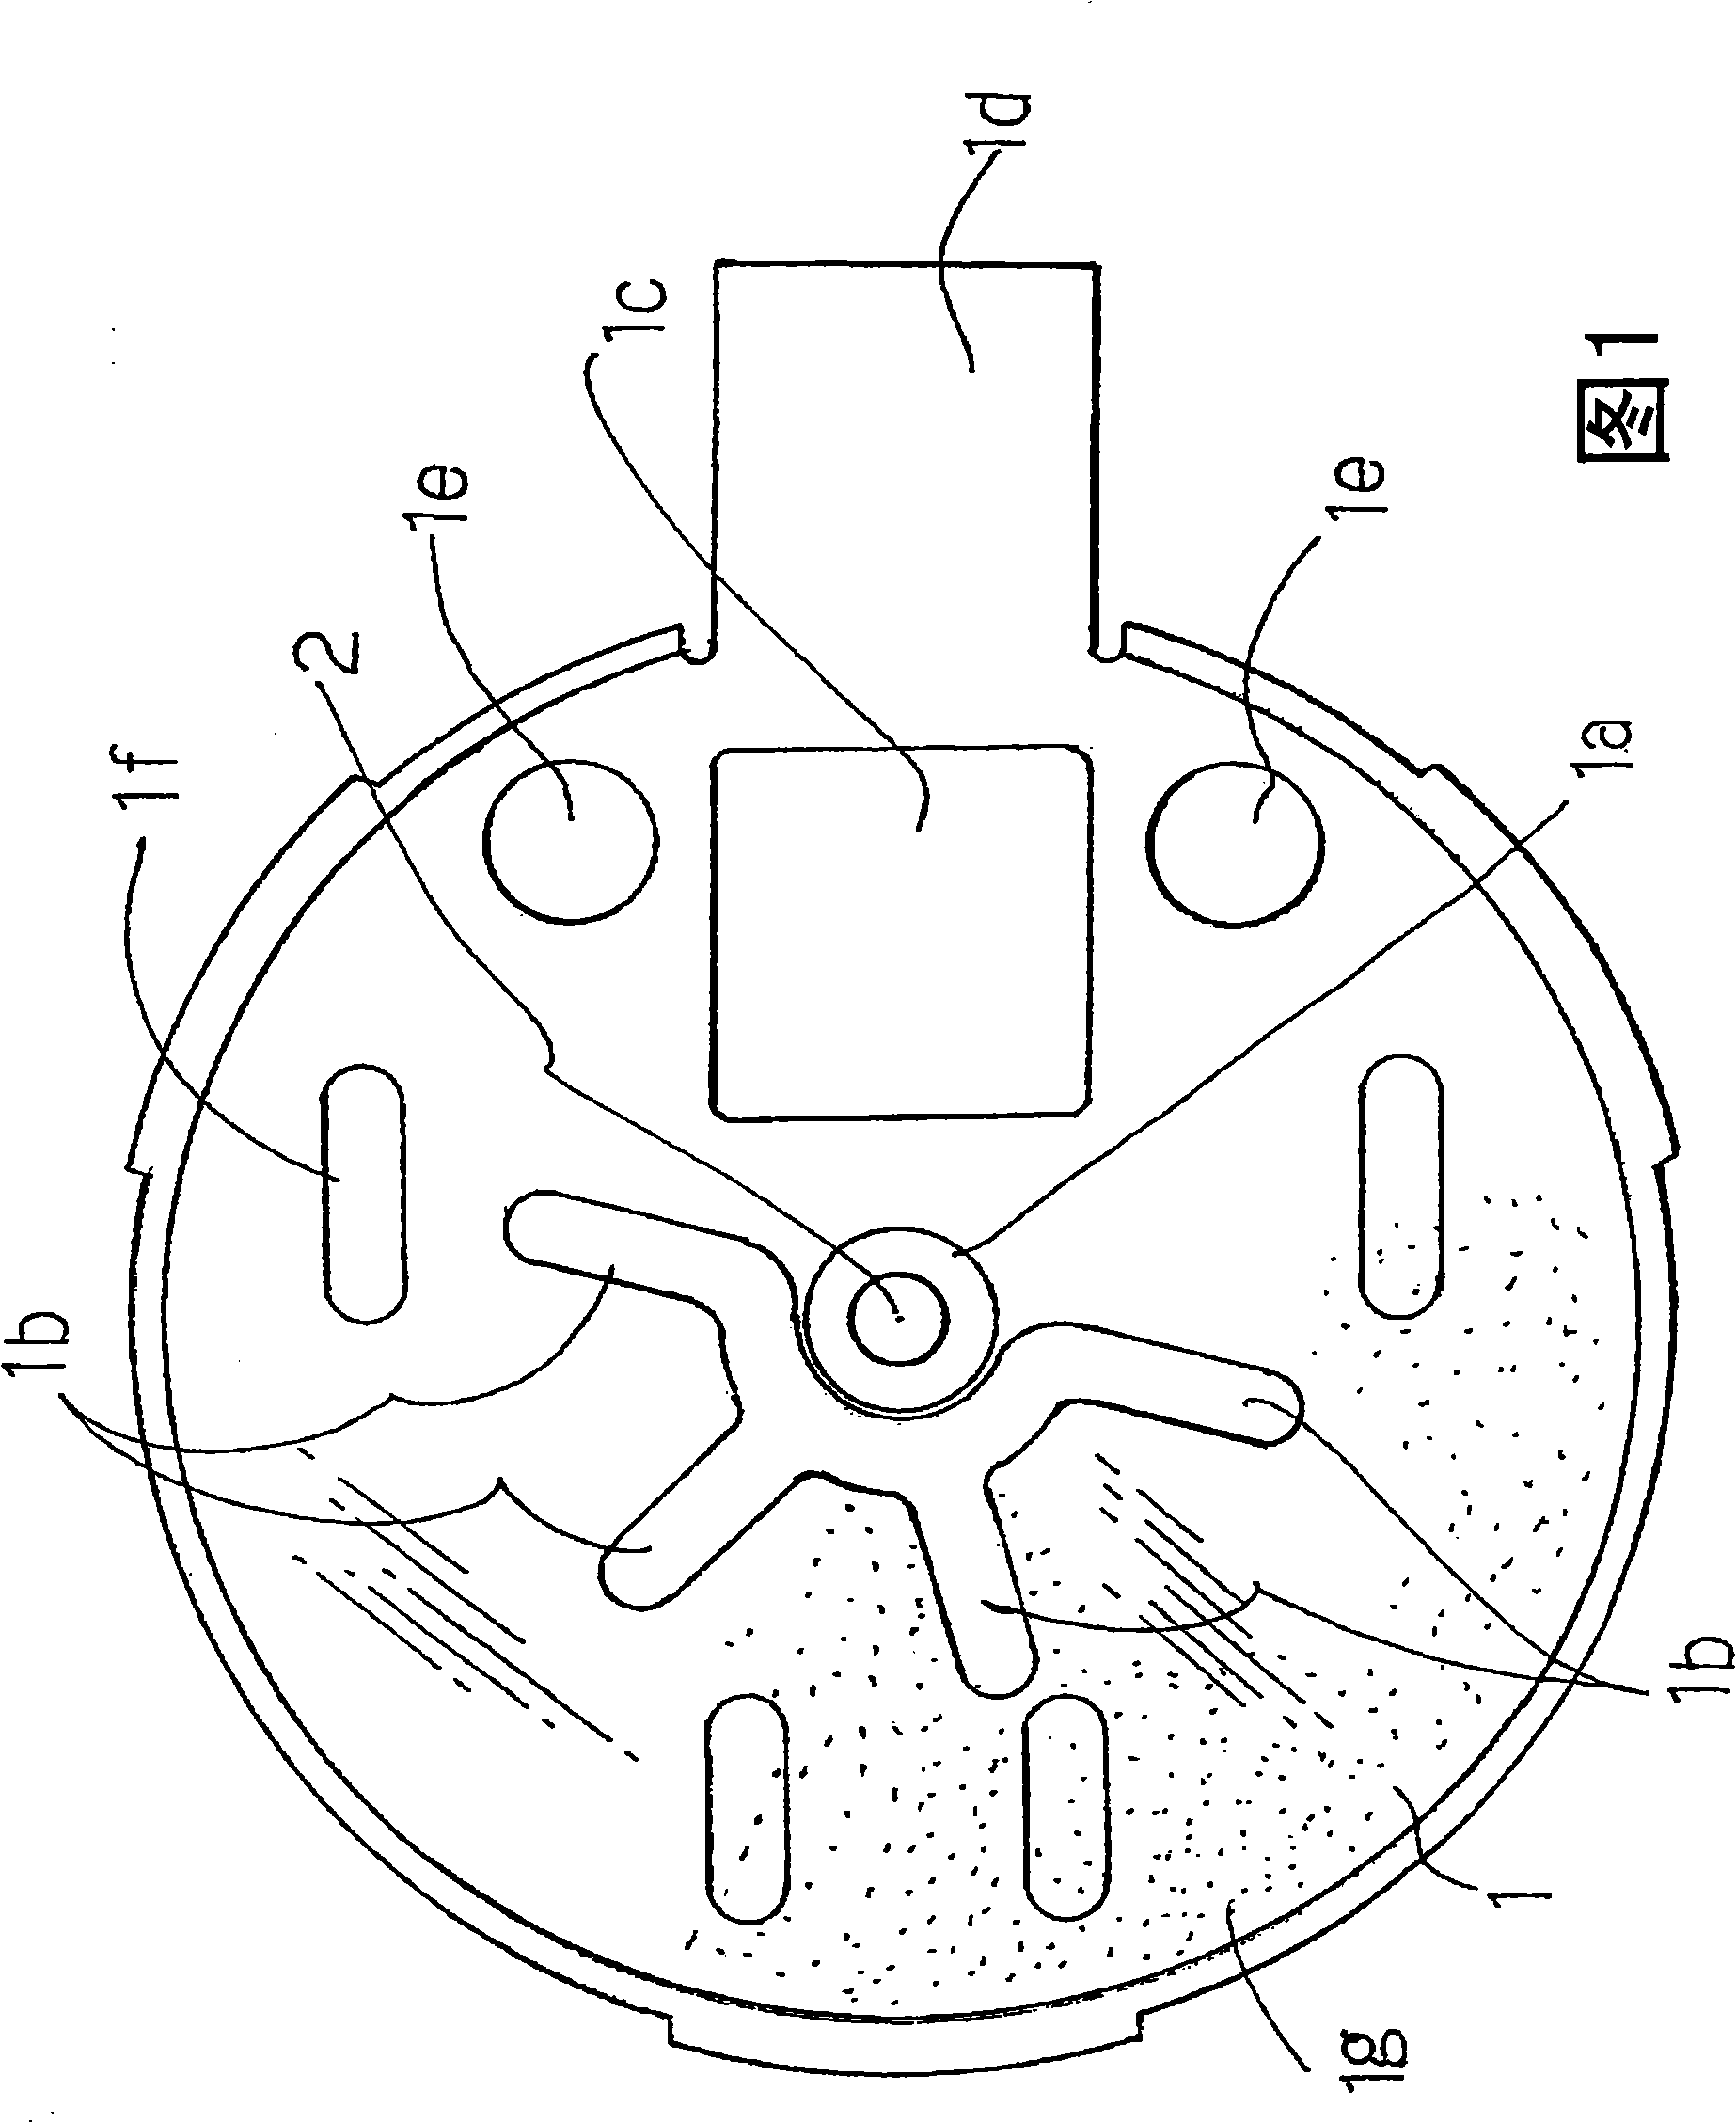 Thin stator, axialclearance brushless vibrating motor with the stator